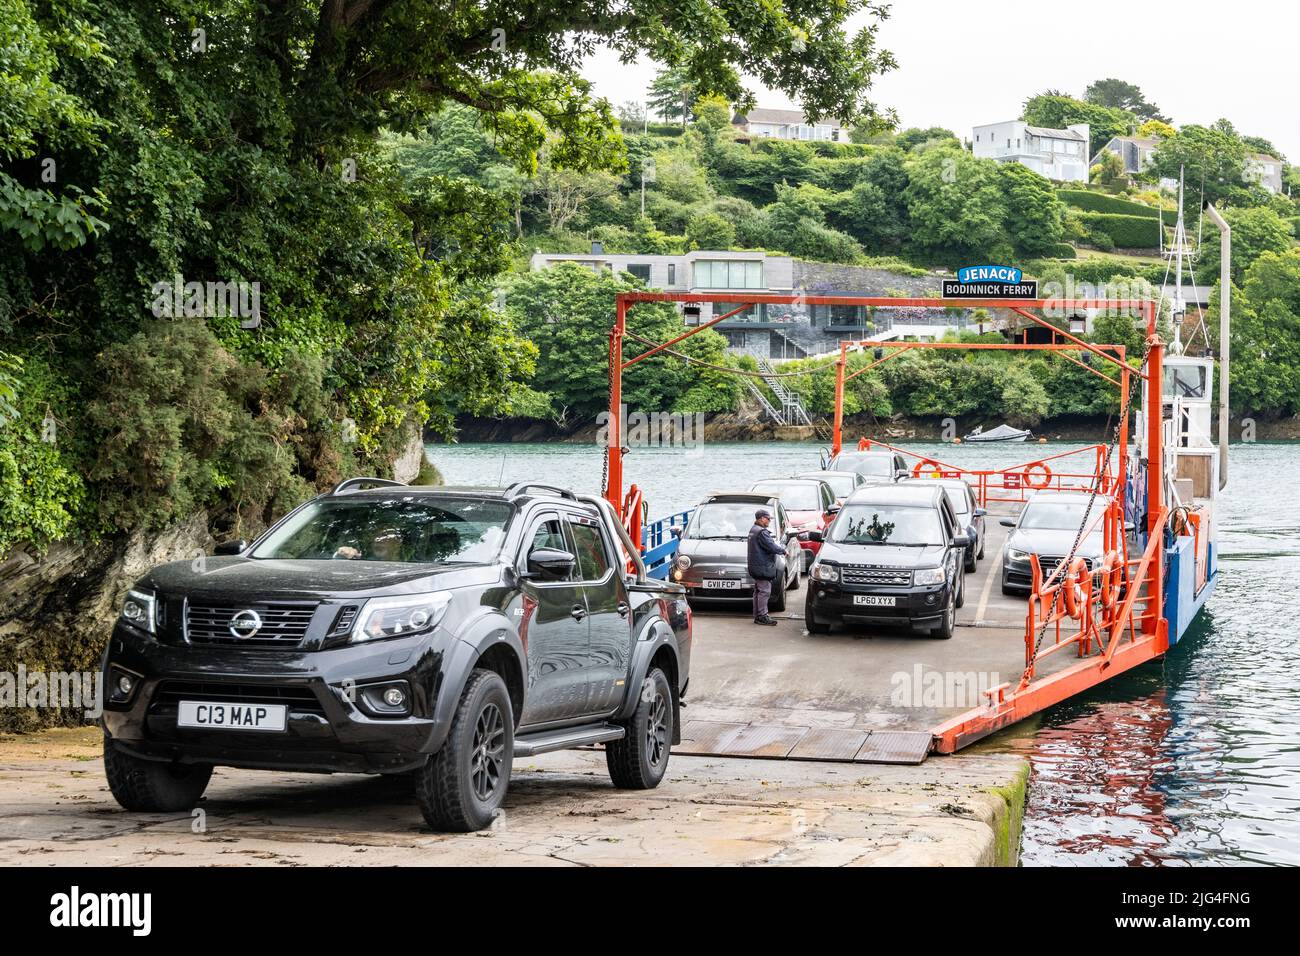 Car ferry. Cars leaving the Bodinnick ferry which crosses the river Fowey, connecting mid and east Cornwall. Fowey, Cornwall, UK Stock Photo